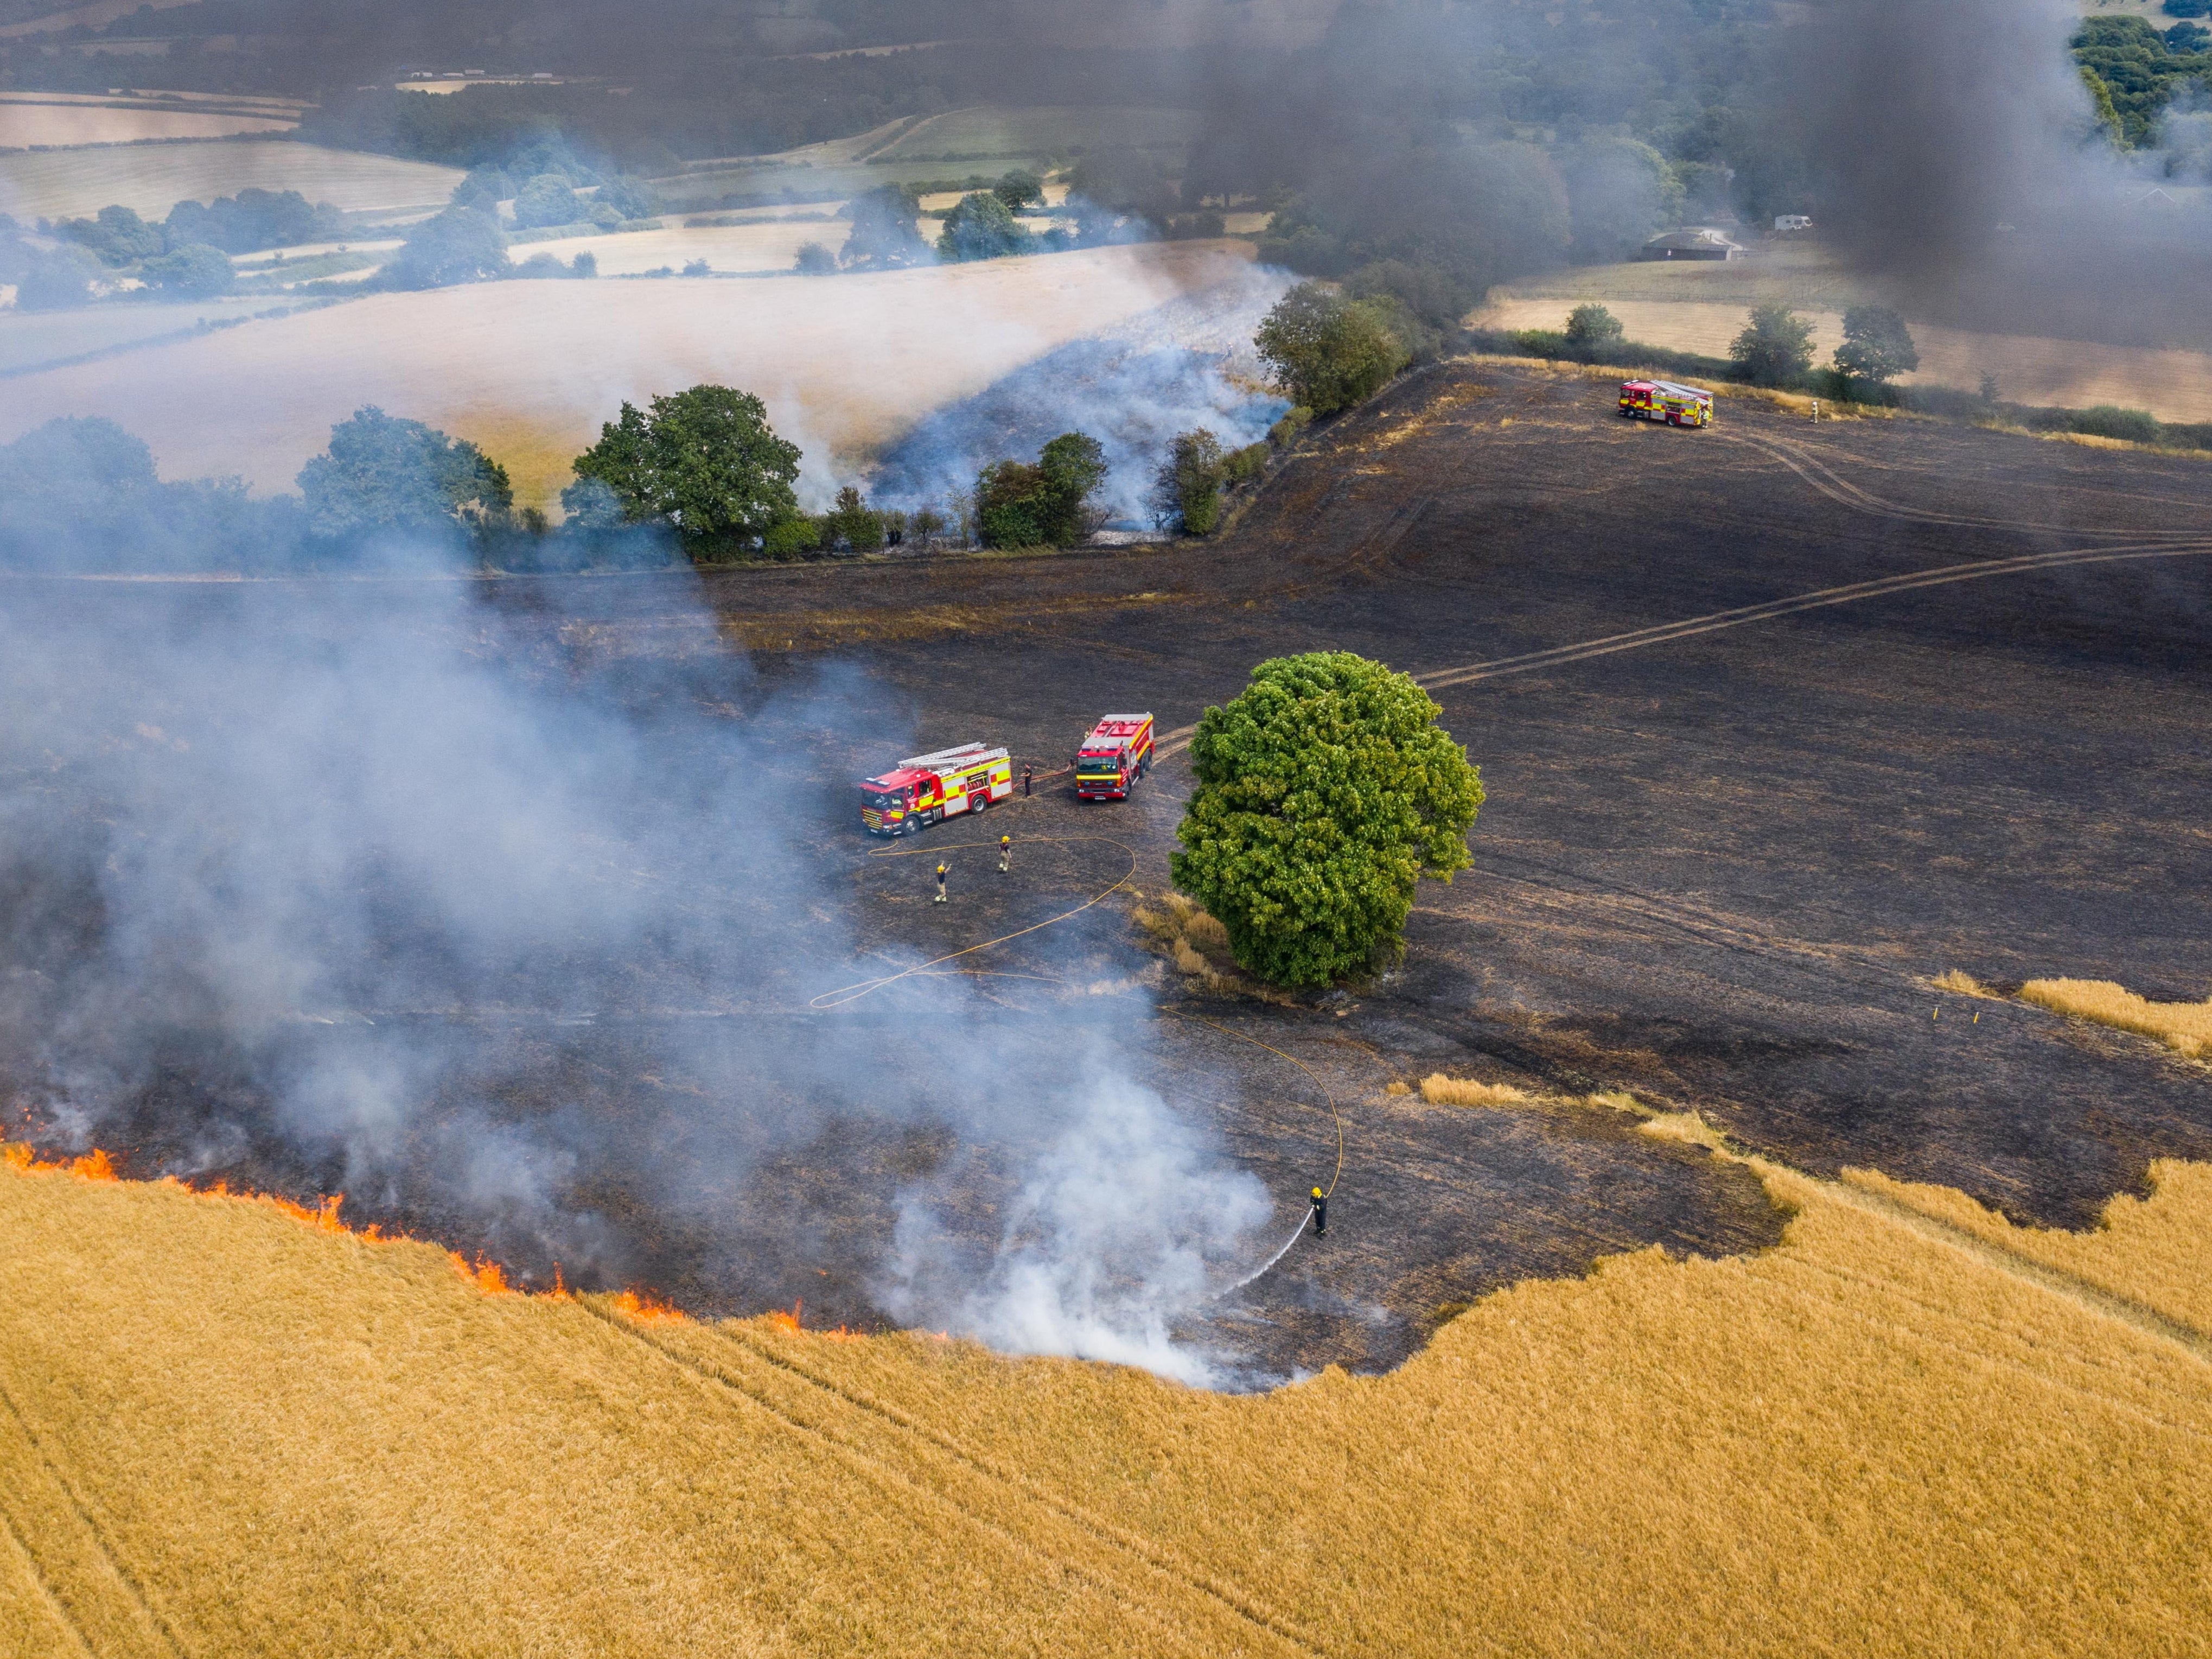 Fire crews fight a wildfire near Chesterfield in Derbyshire on Monday